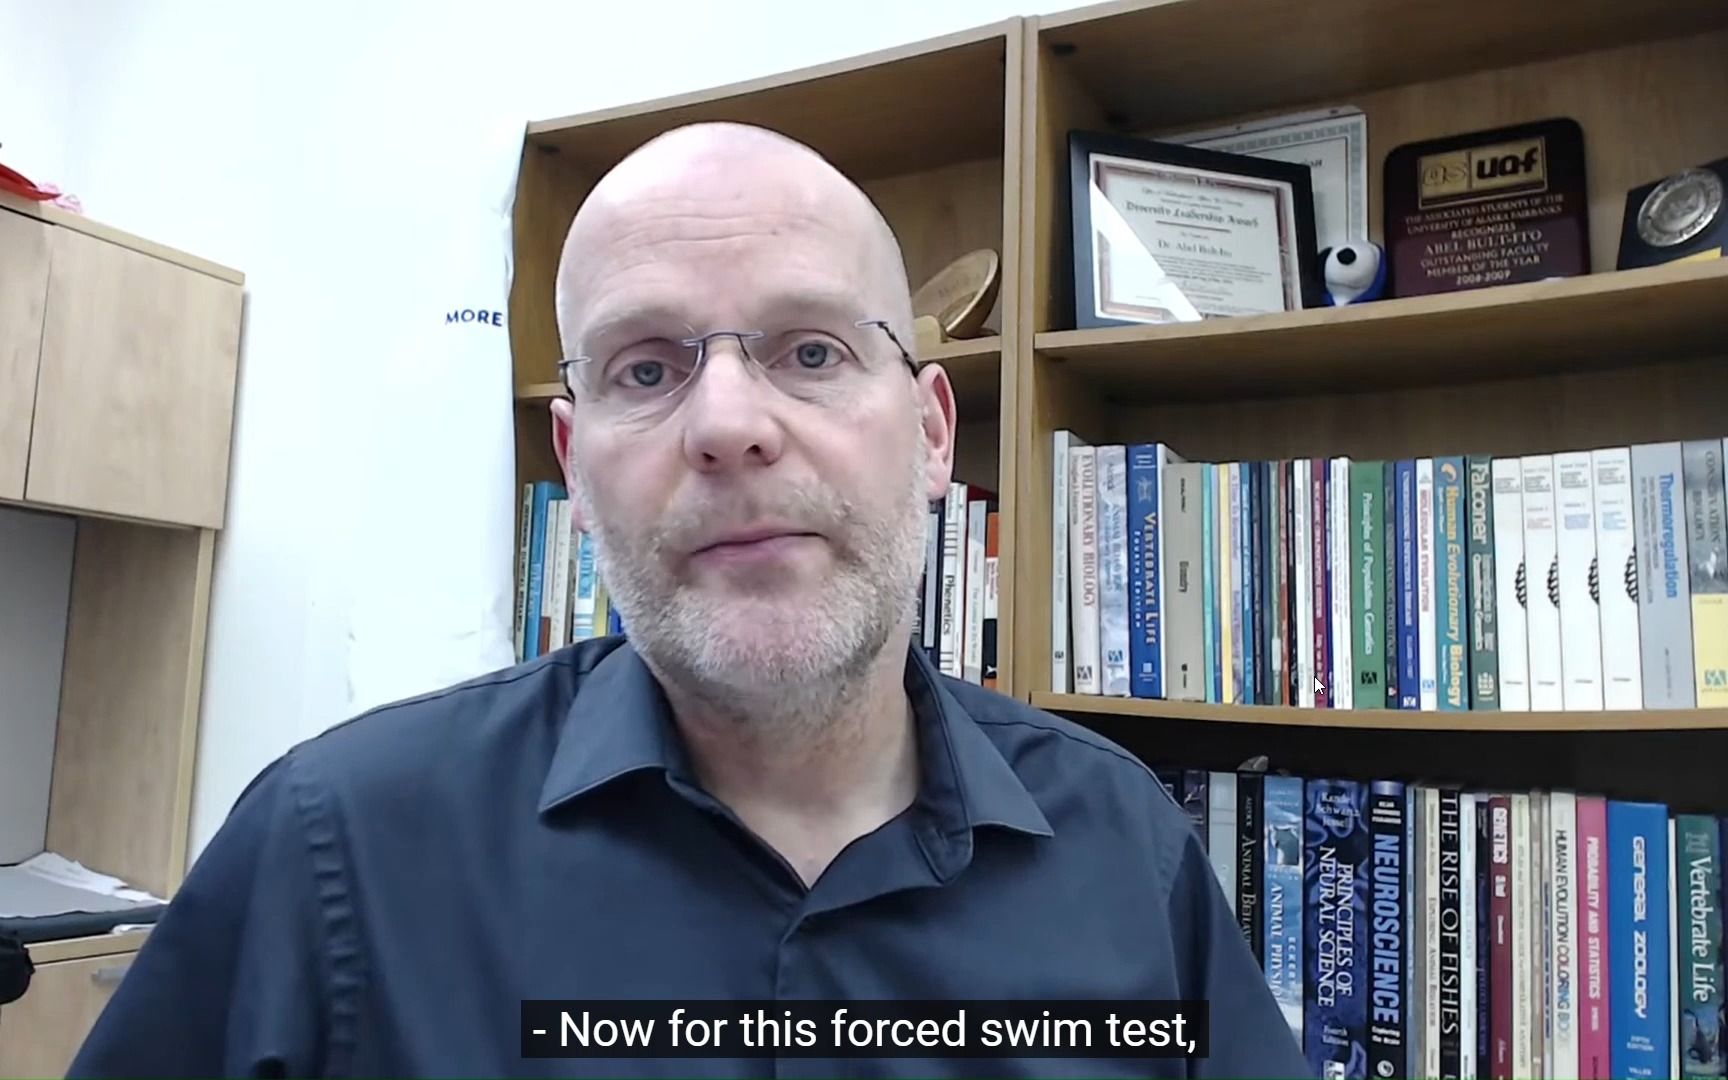 What the Forced Swim Test Measures